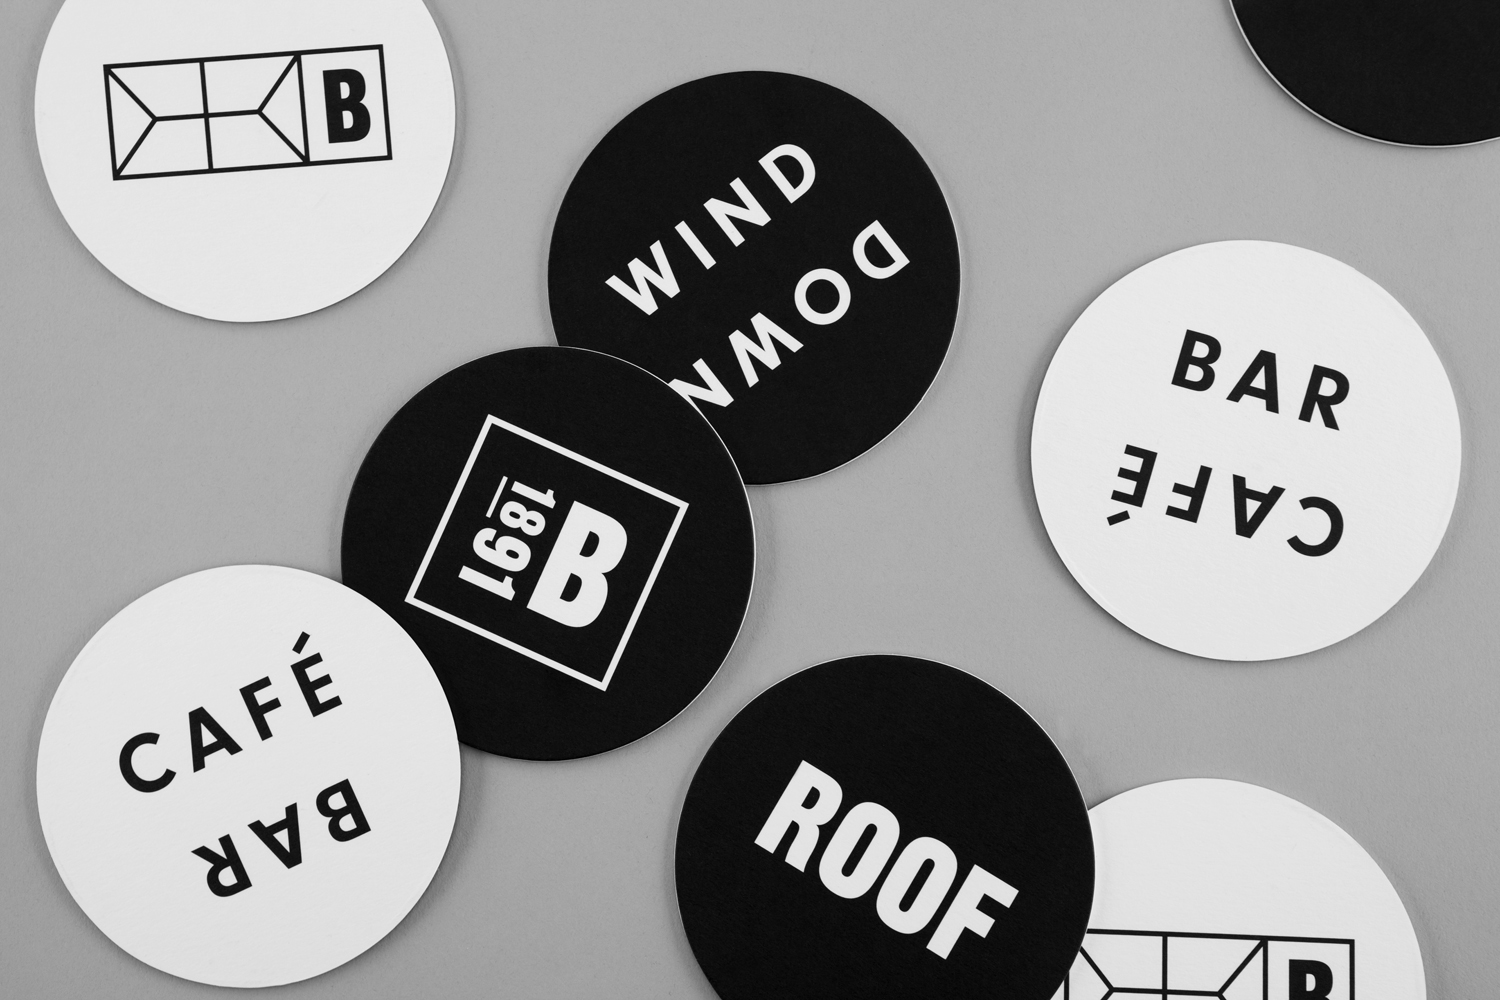 Visual identity and coasters designed by Blok for Toronto's The Broadview Hotel